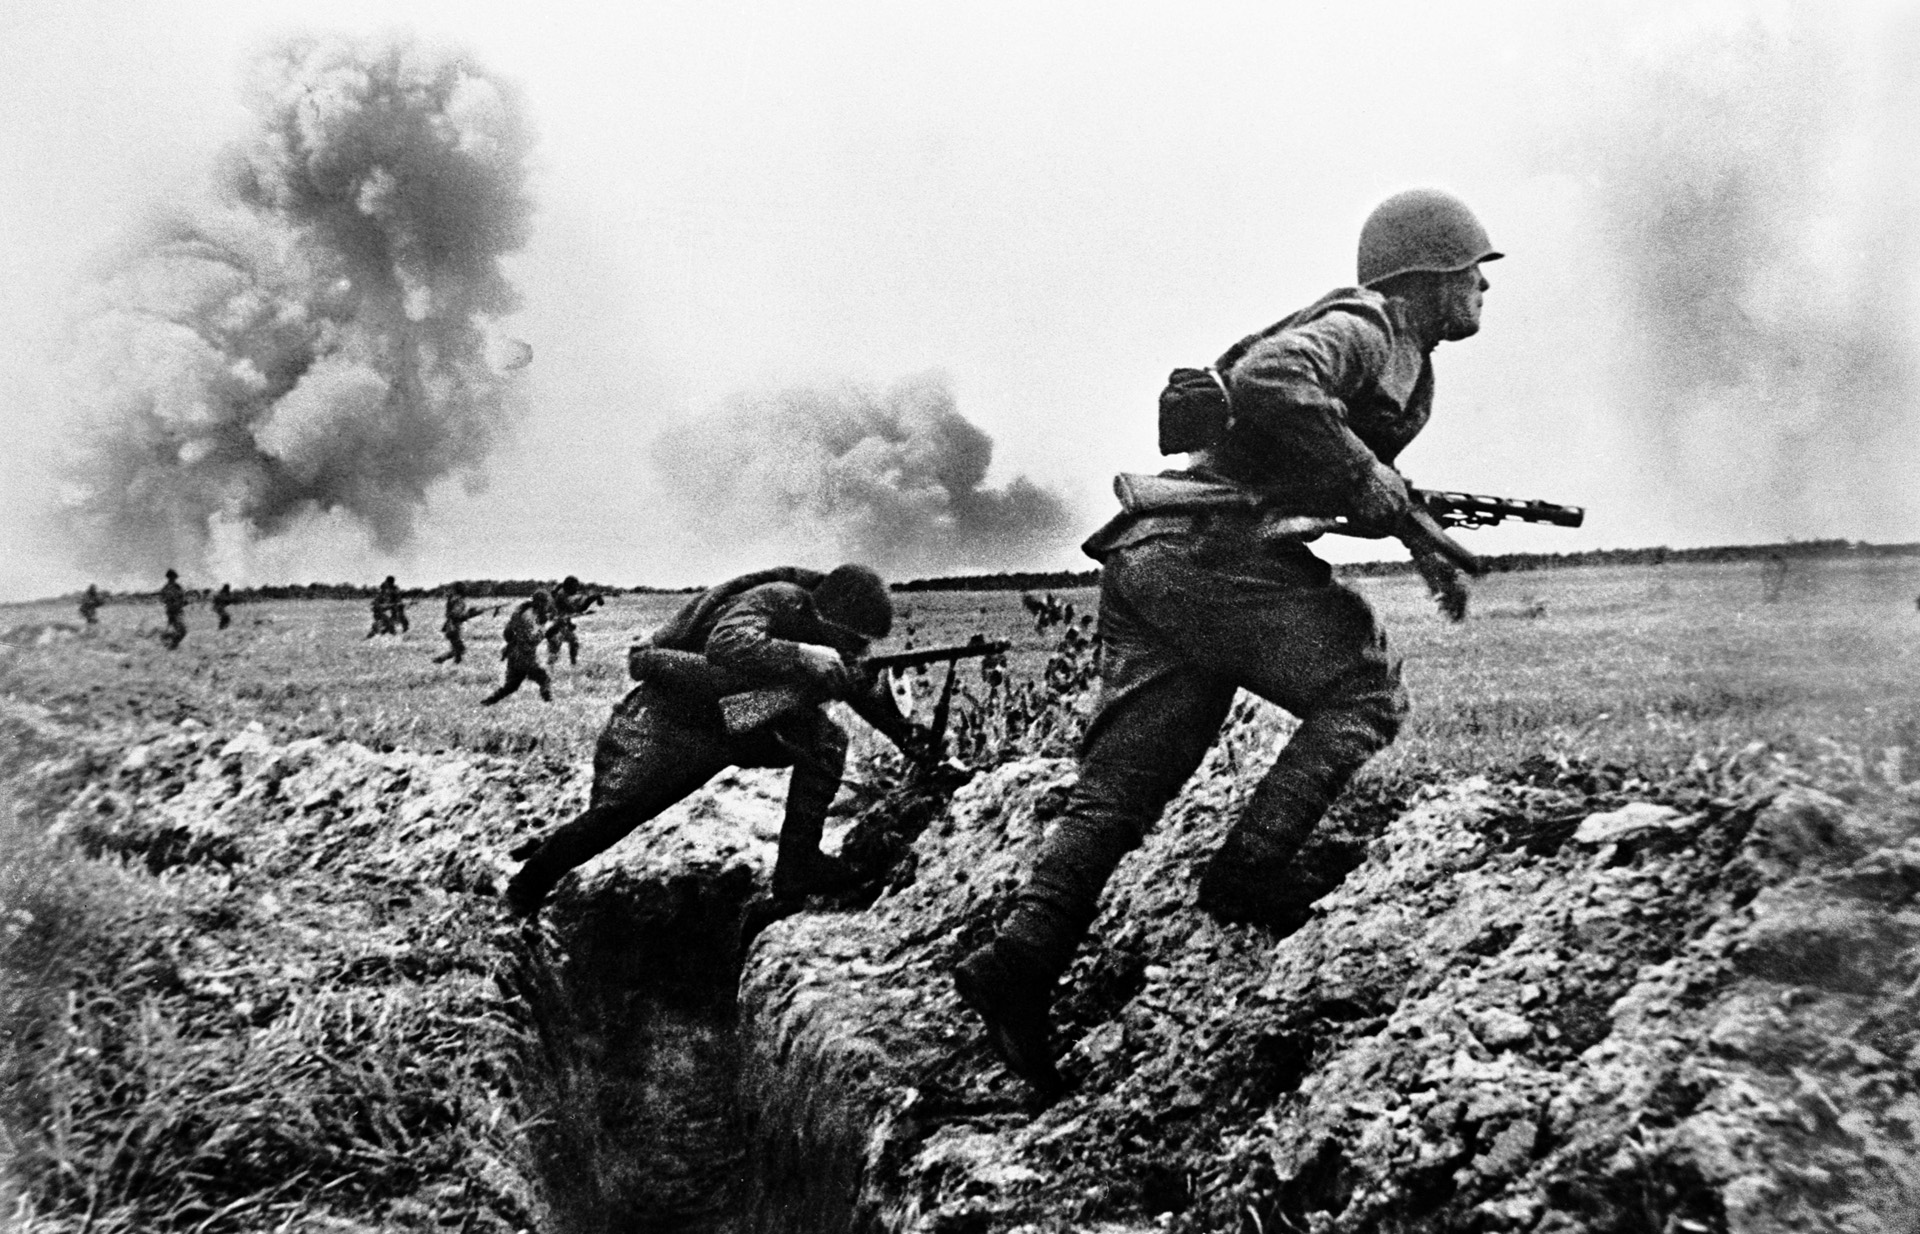 Although they suffered tremendous casualties fighting the invading Germans during the summer of 1941, the soldiers of the Red Army displayed exceptional courage, putting up stiff resistance in some areas while Mother Russia reeled from the surprise of Operation Barbarossa.